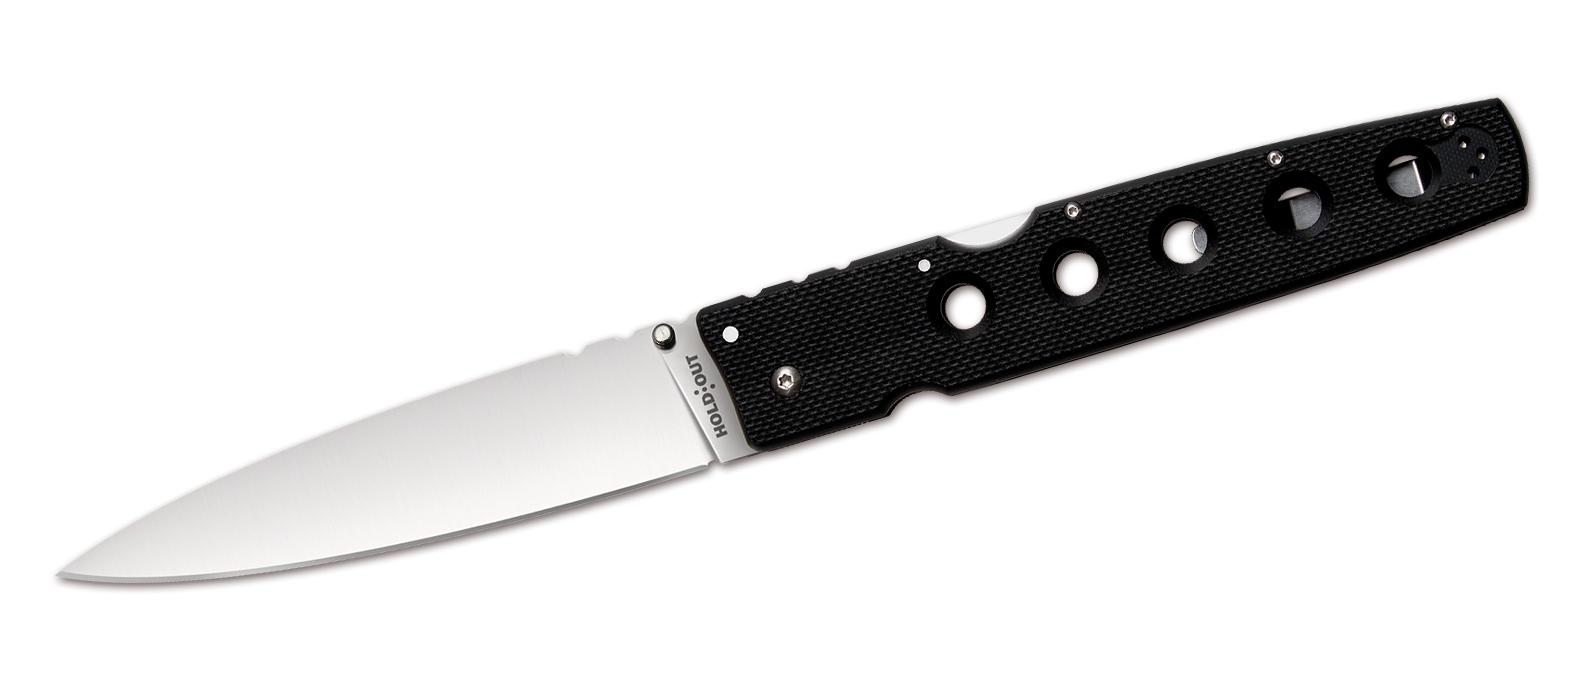 Foto Cold Steel Hold Out I Plain Edge (Modell 2012/13)